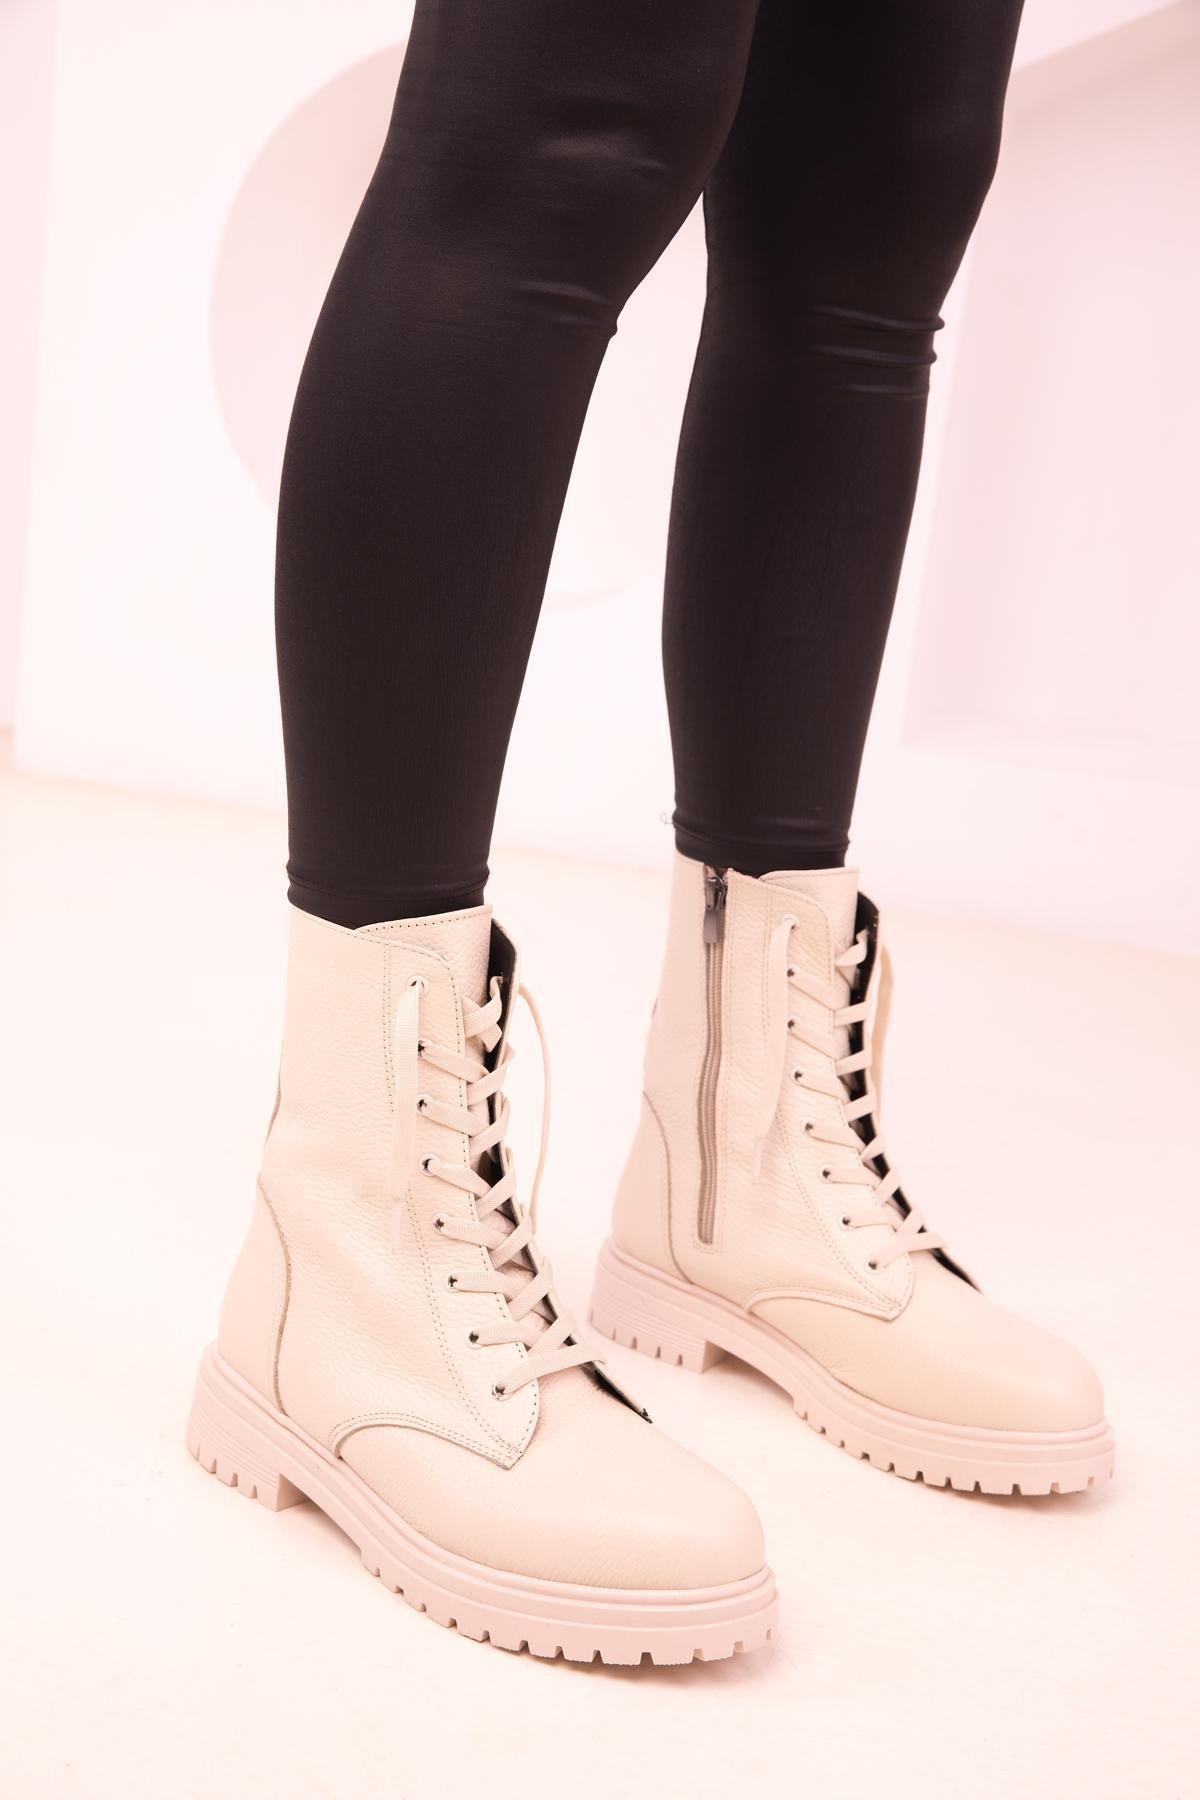 SOHO - Beige Zippered Ankle Boots